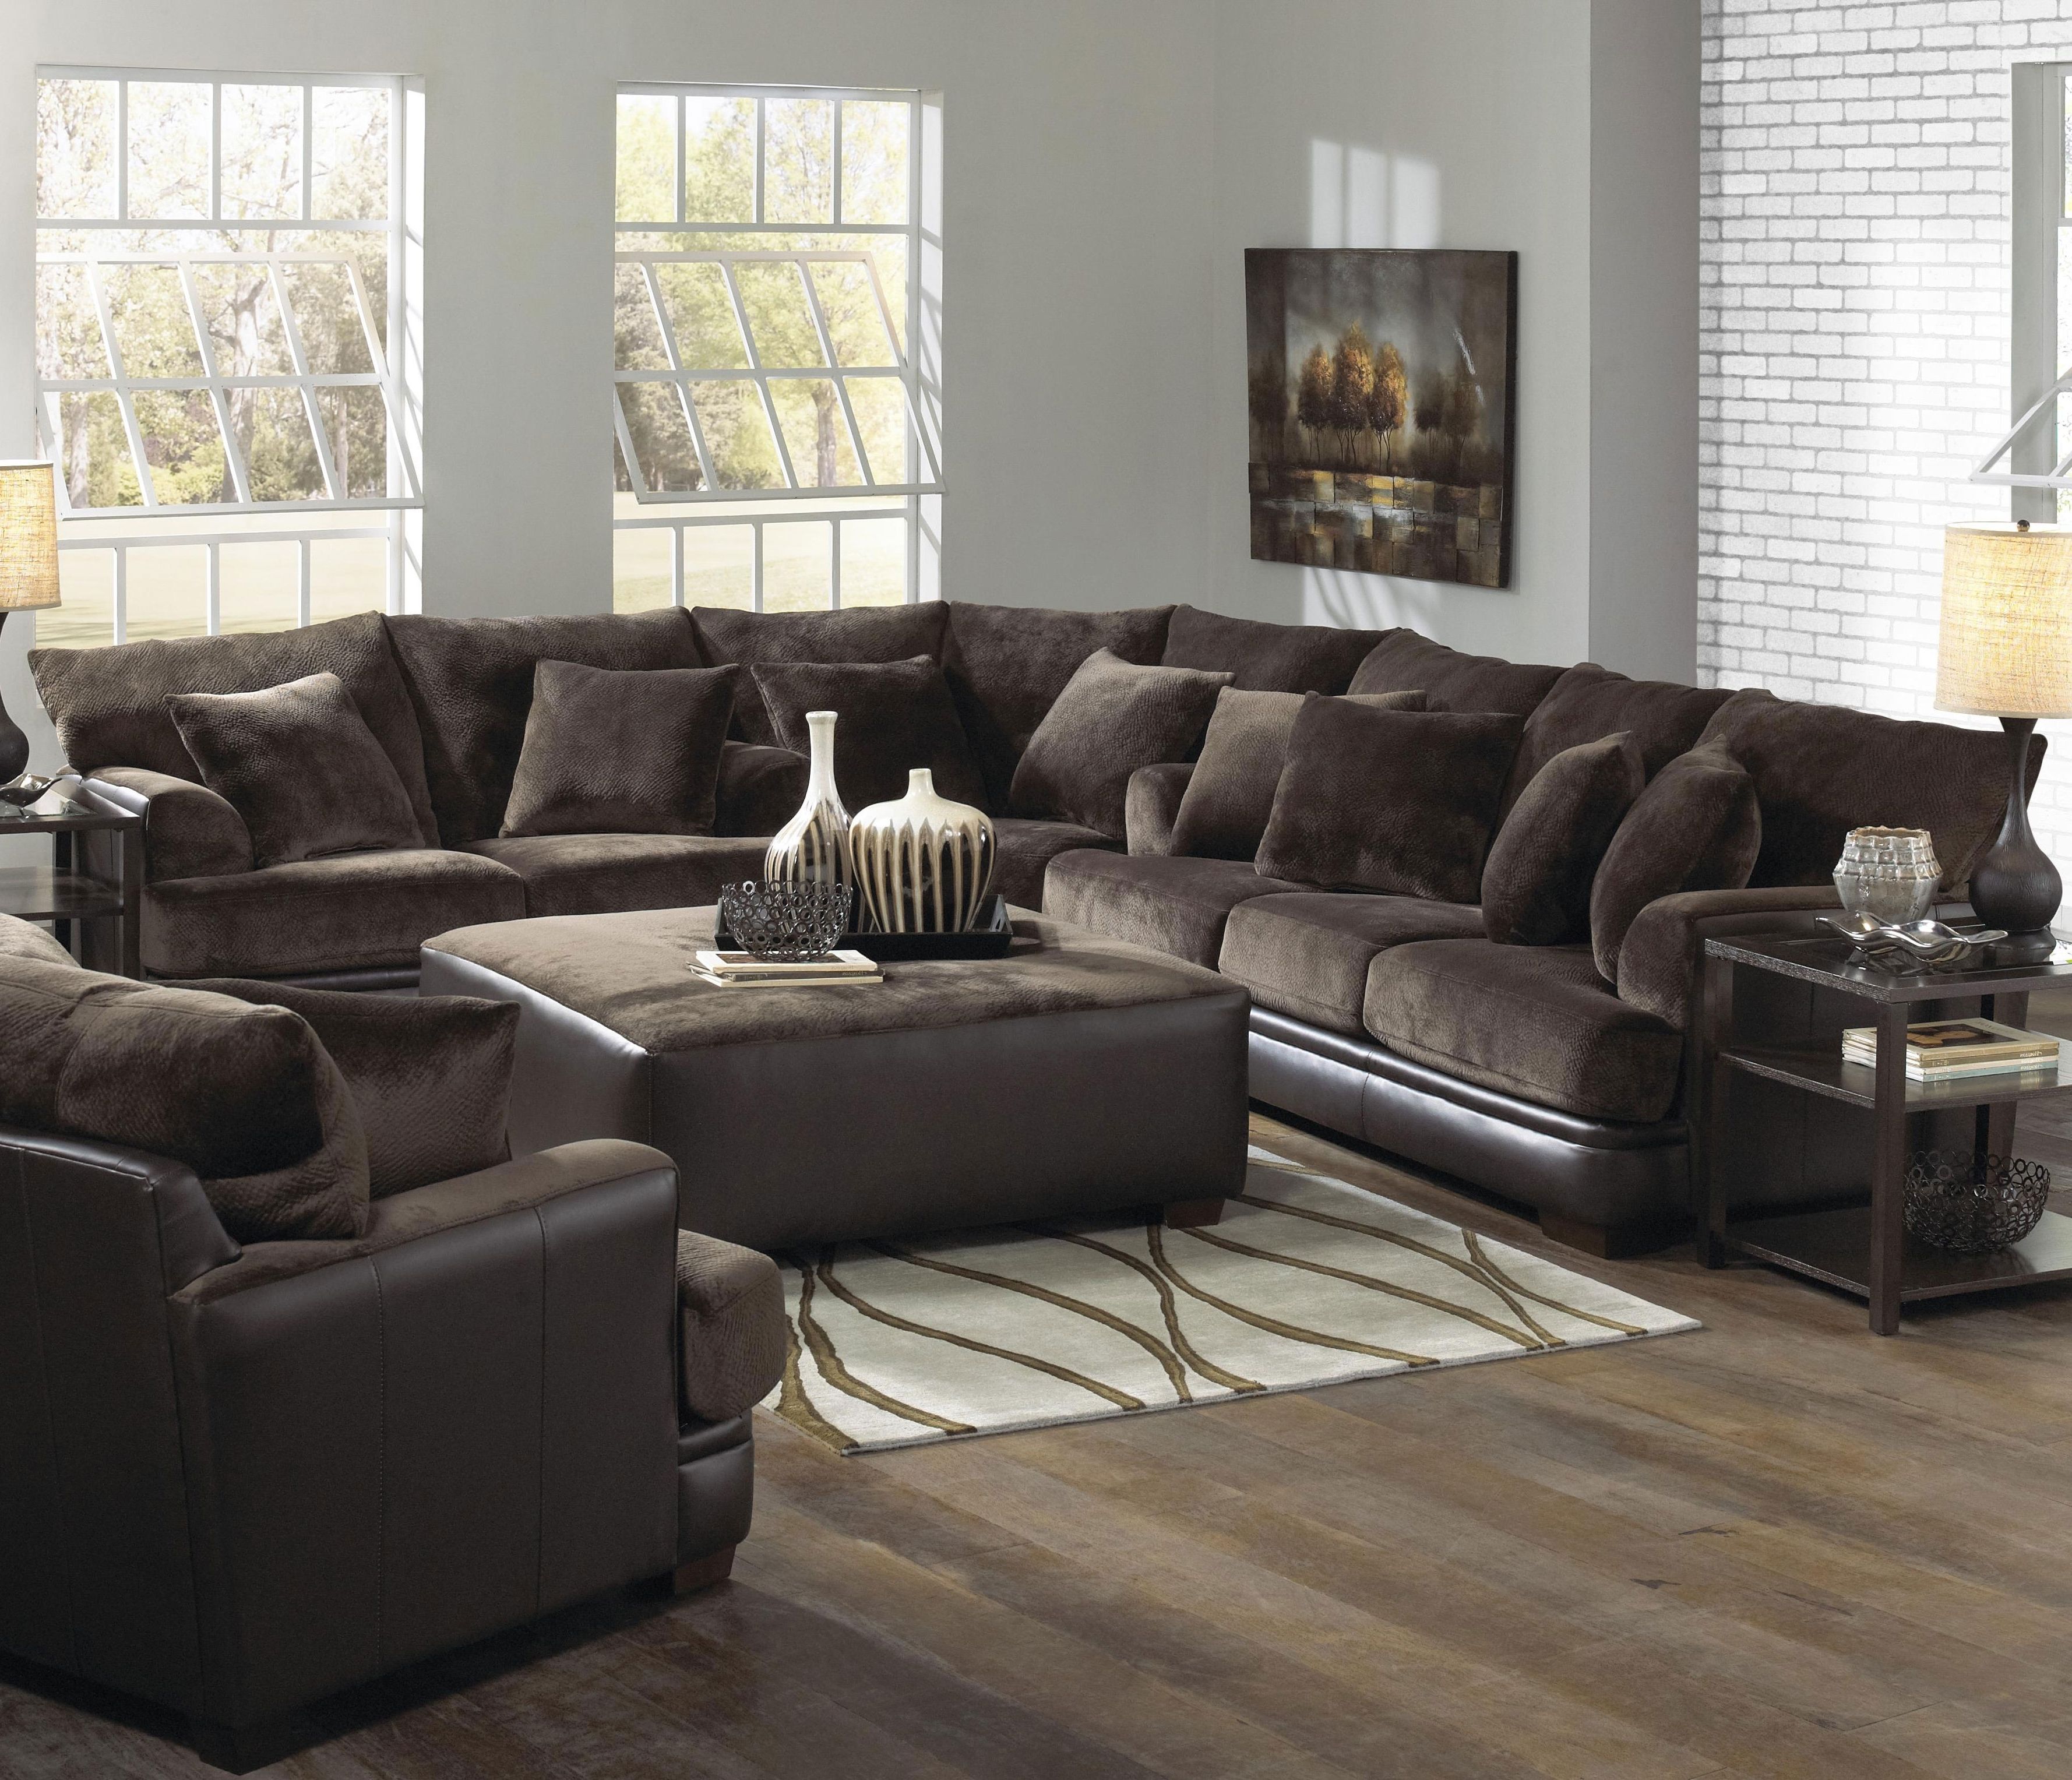 C Shaped Sofas Regarding Most Up To Date Sectional Sofa: The Best Design C Shaped Sofa Sectional C Shaped (Photo 8 of 15)